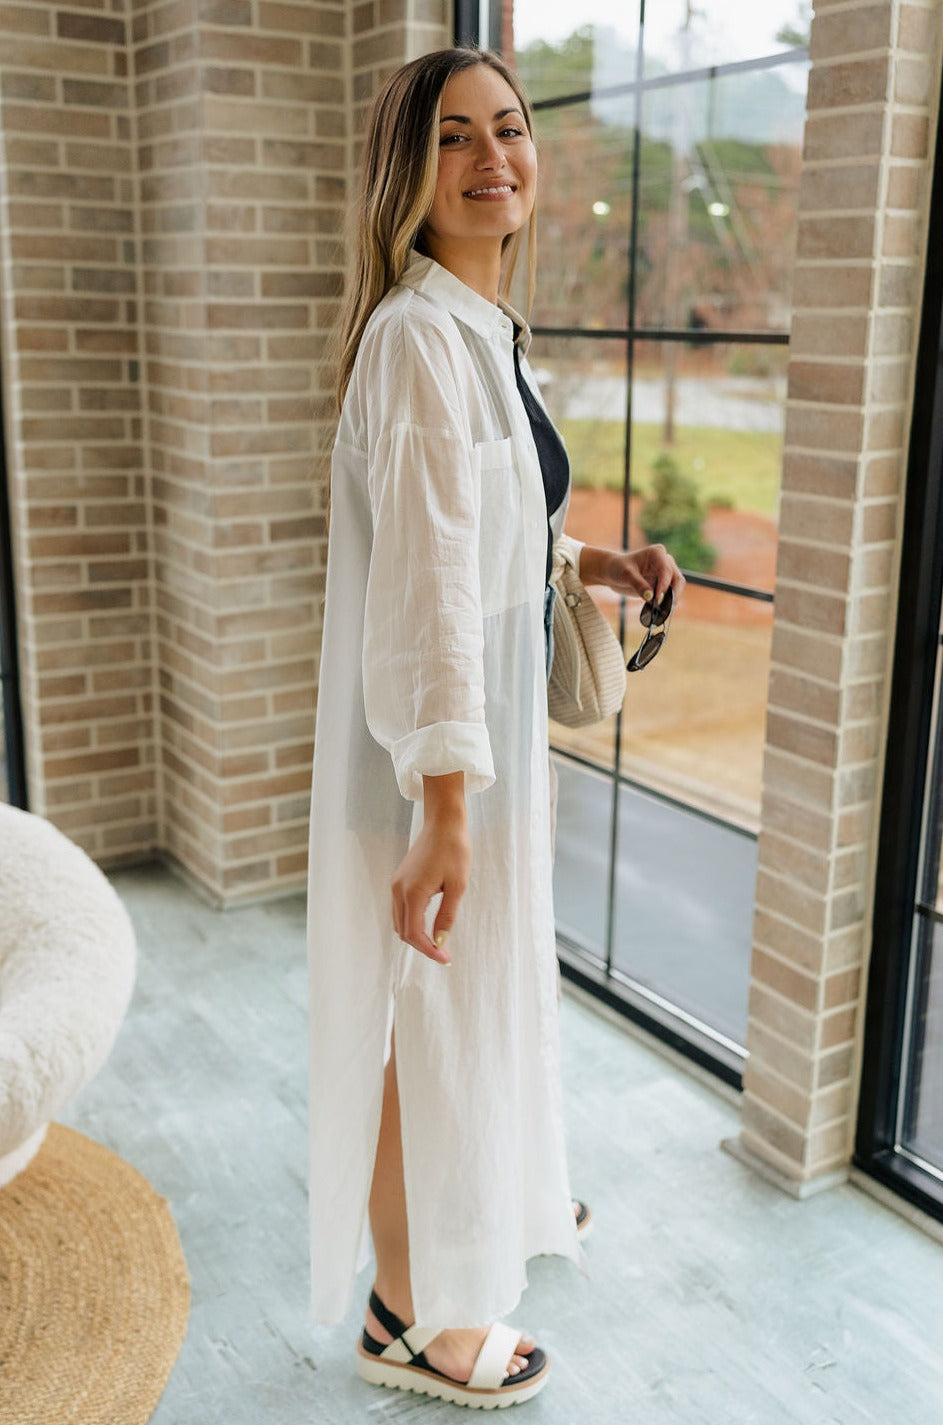  Full body side view of female model wearing the Luna Off White Button-Up Cover Up Dress which features White Cotton Fabric, Midi Length, Slits on each side , Button-Up Front Closure, Collared Neckline and Long Sleeves.